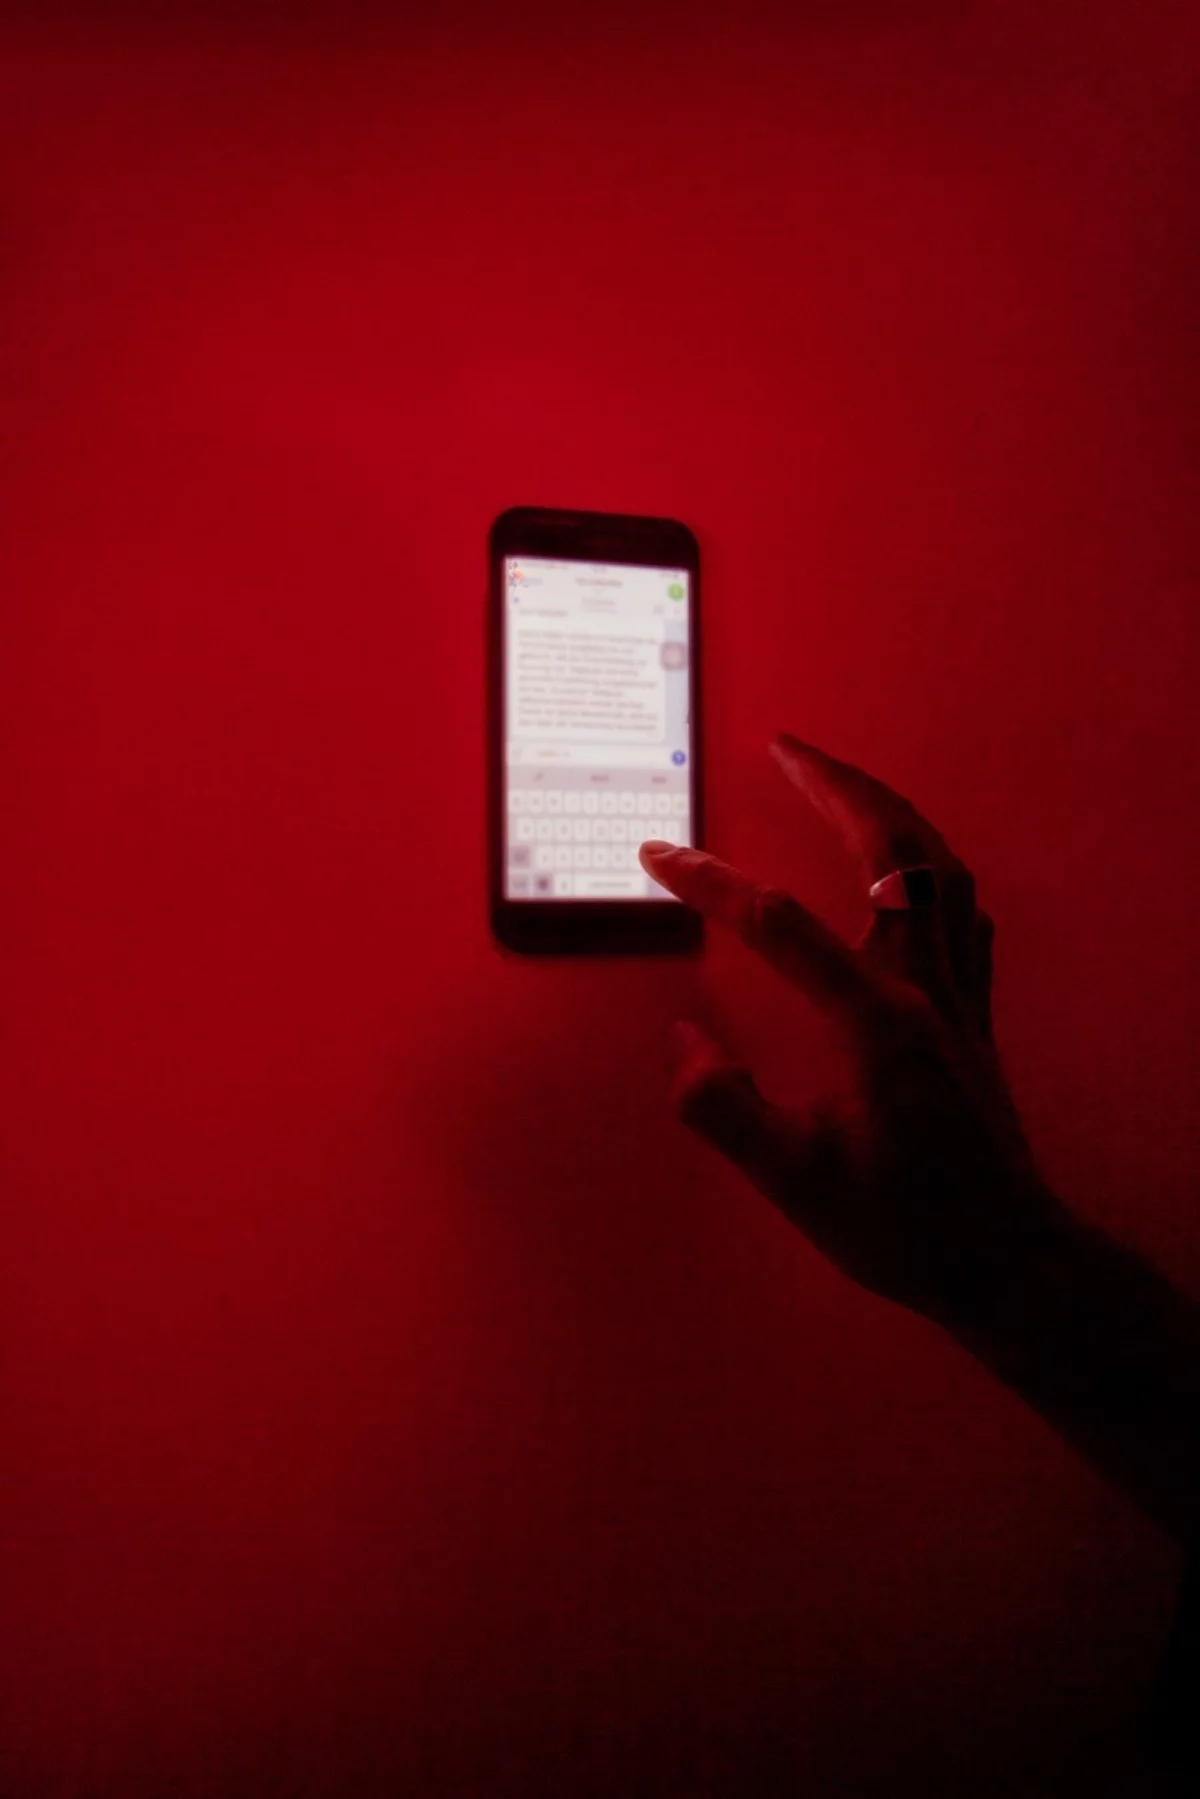 Against a red background is a smartphone with a messenger service open. A hand is typing a message on it.